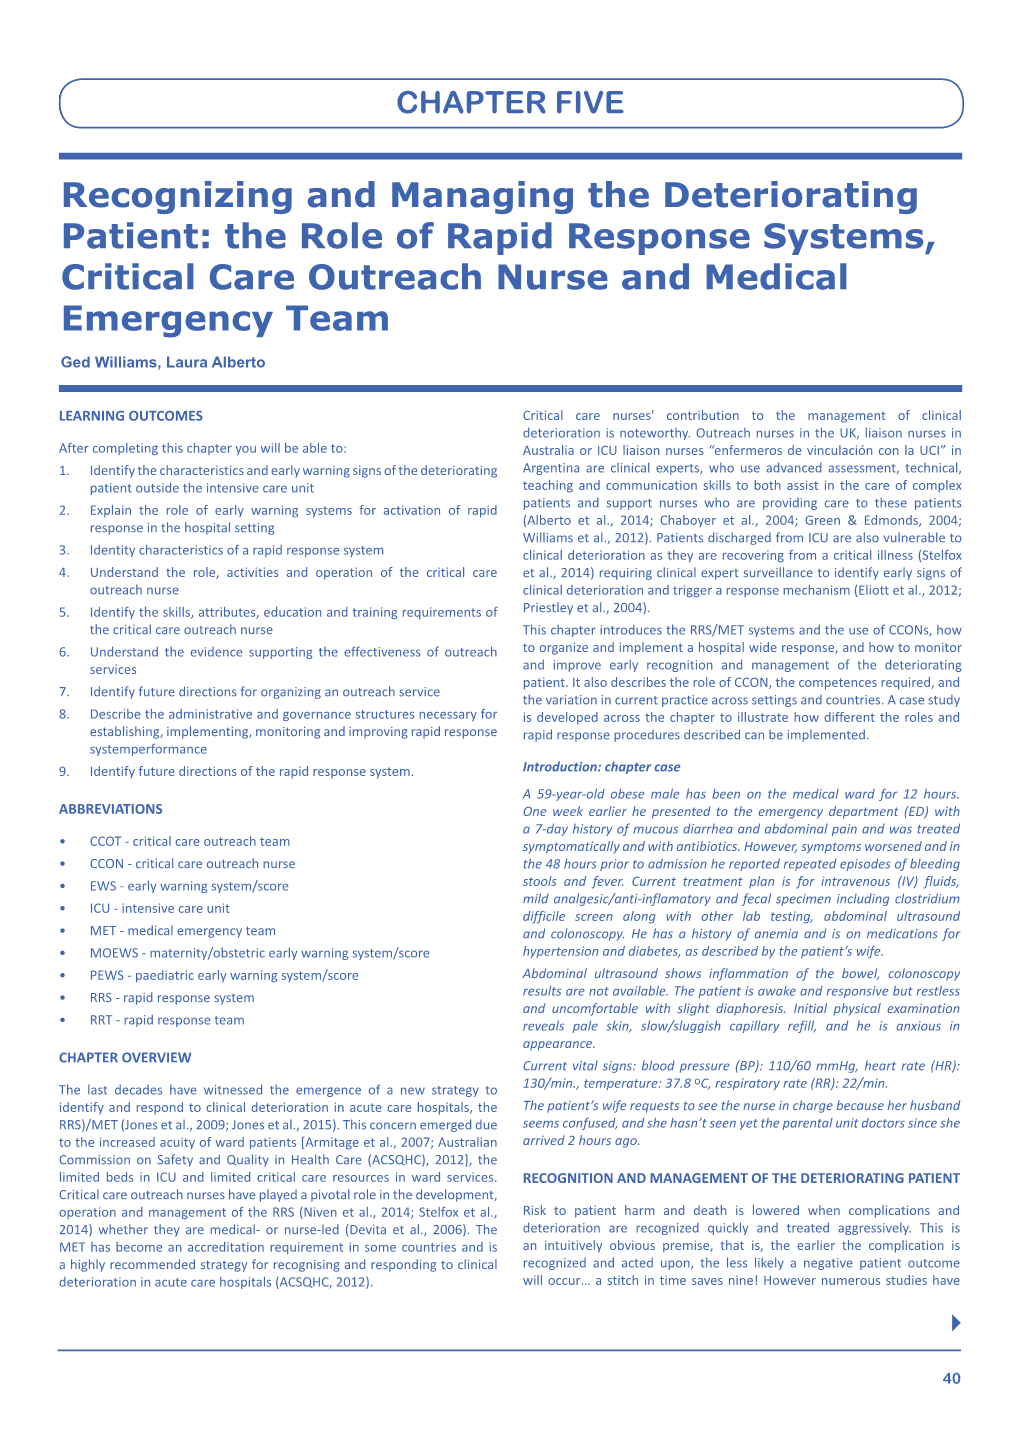 The Role of Rapid Response Systems, Critical Care Outreach Nurse and Medical Emergency Team